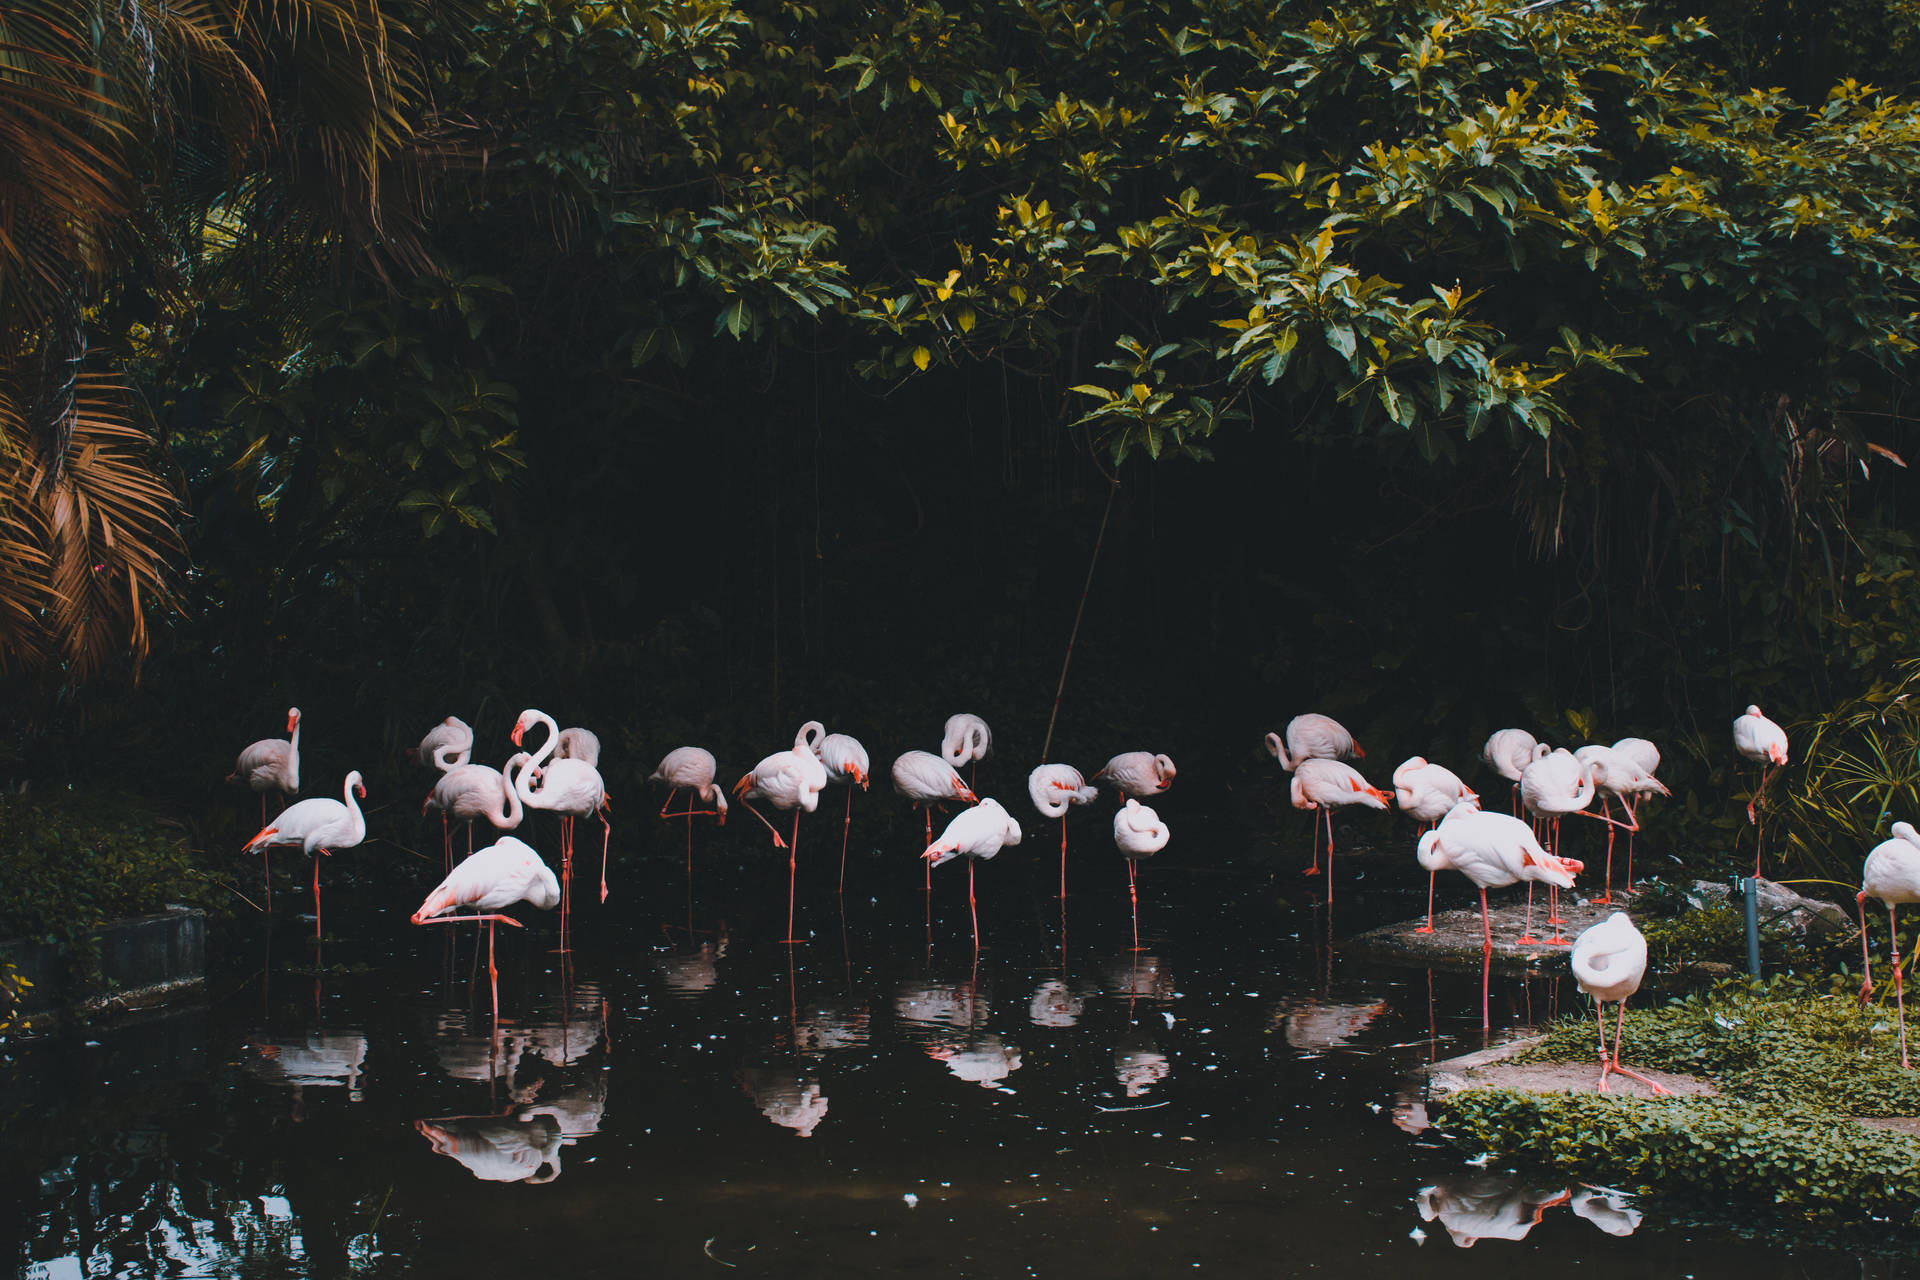 5743X3829 Flamingo Wallpaper and Background